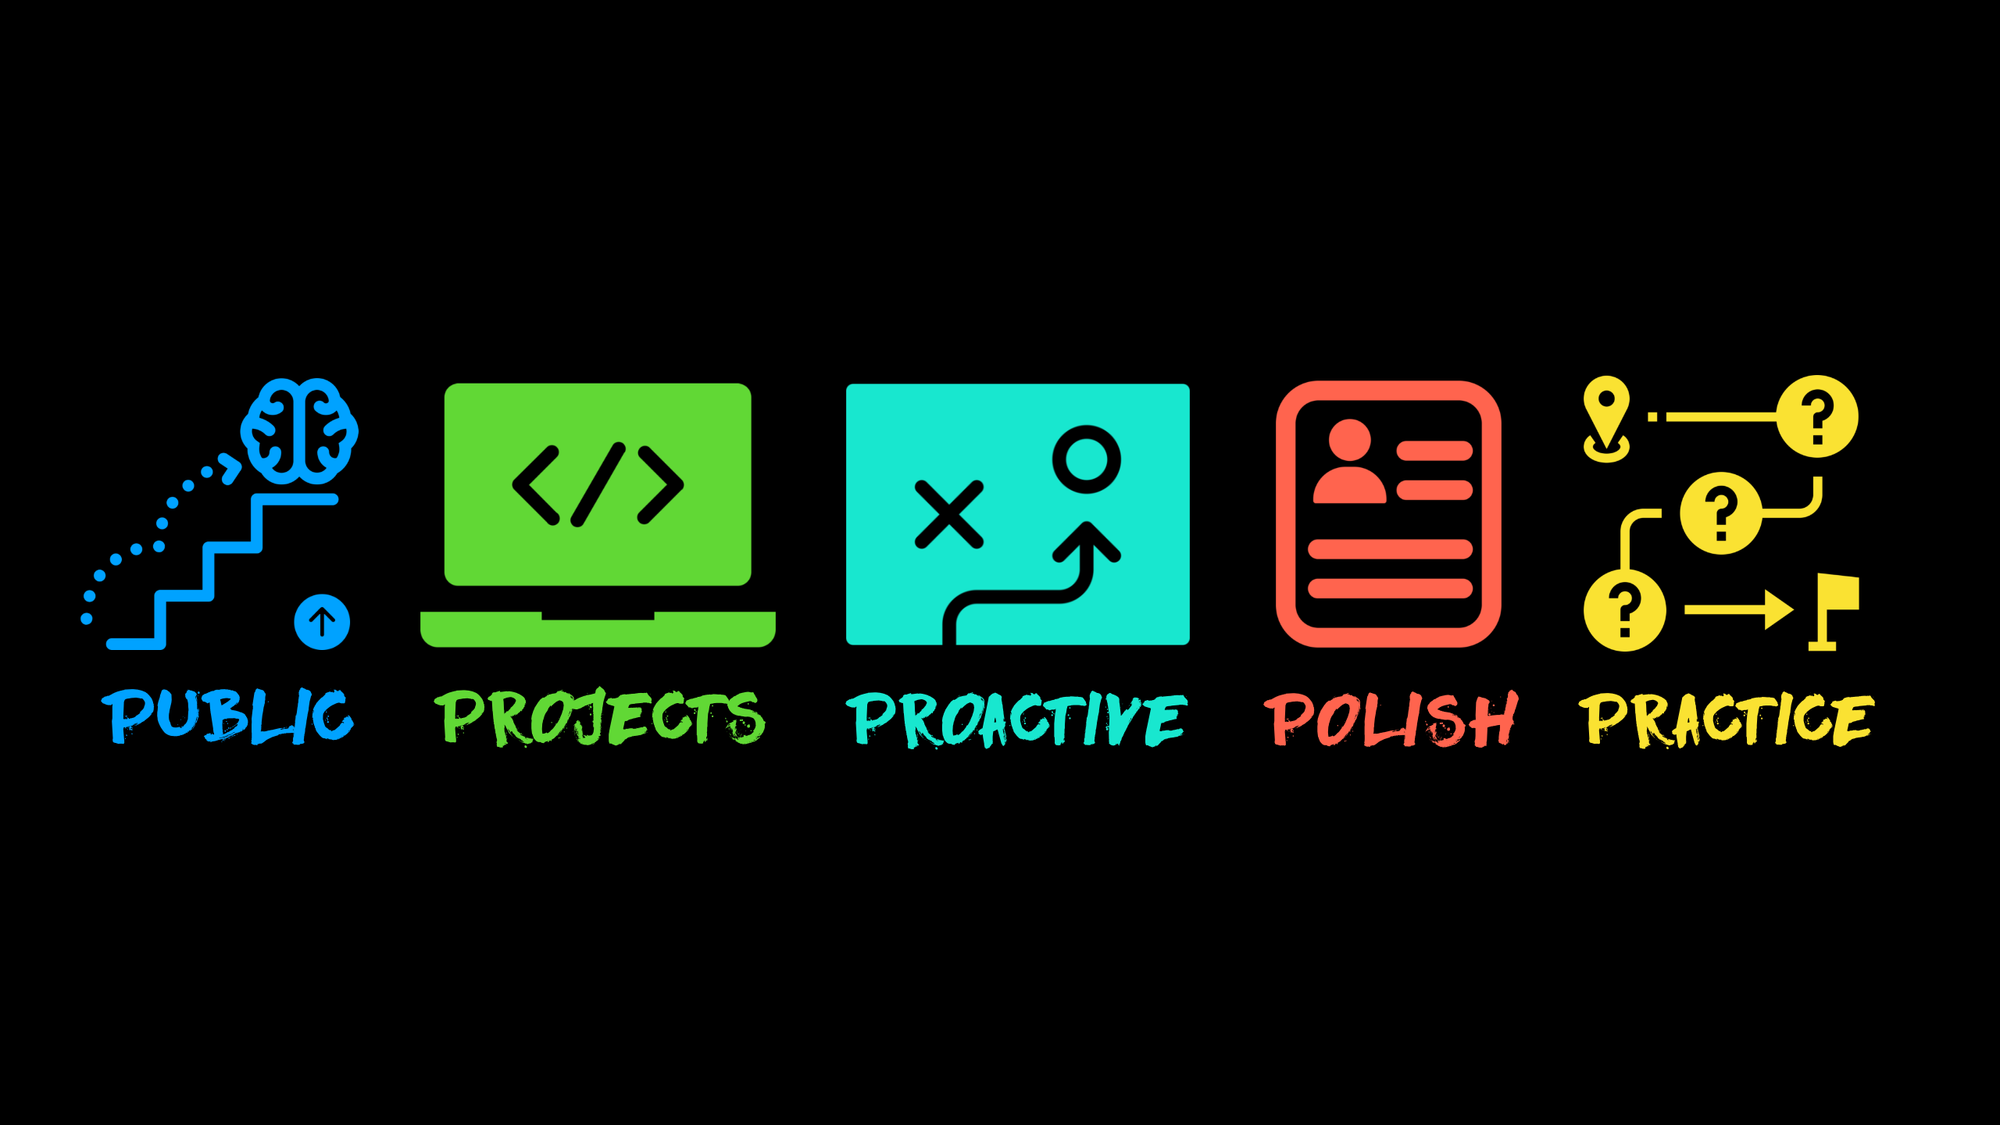 Five icons on a black background with text public, projects, proactive, polish and practice.